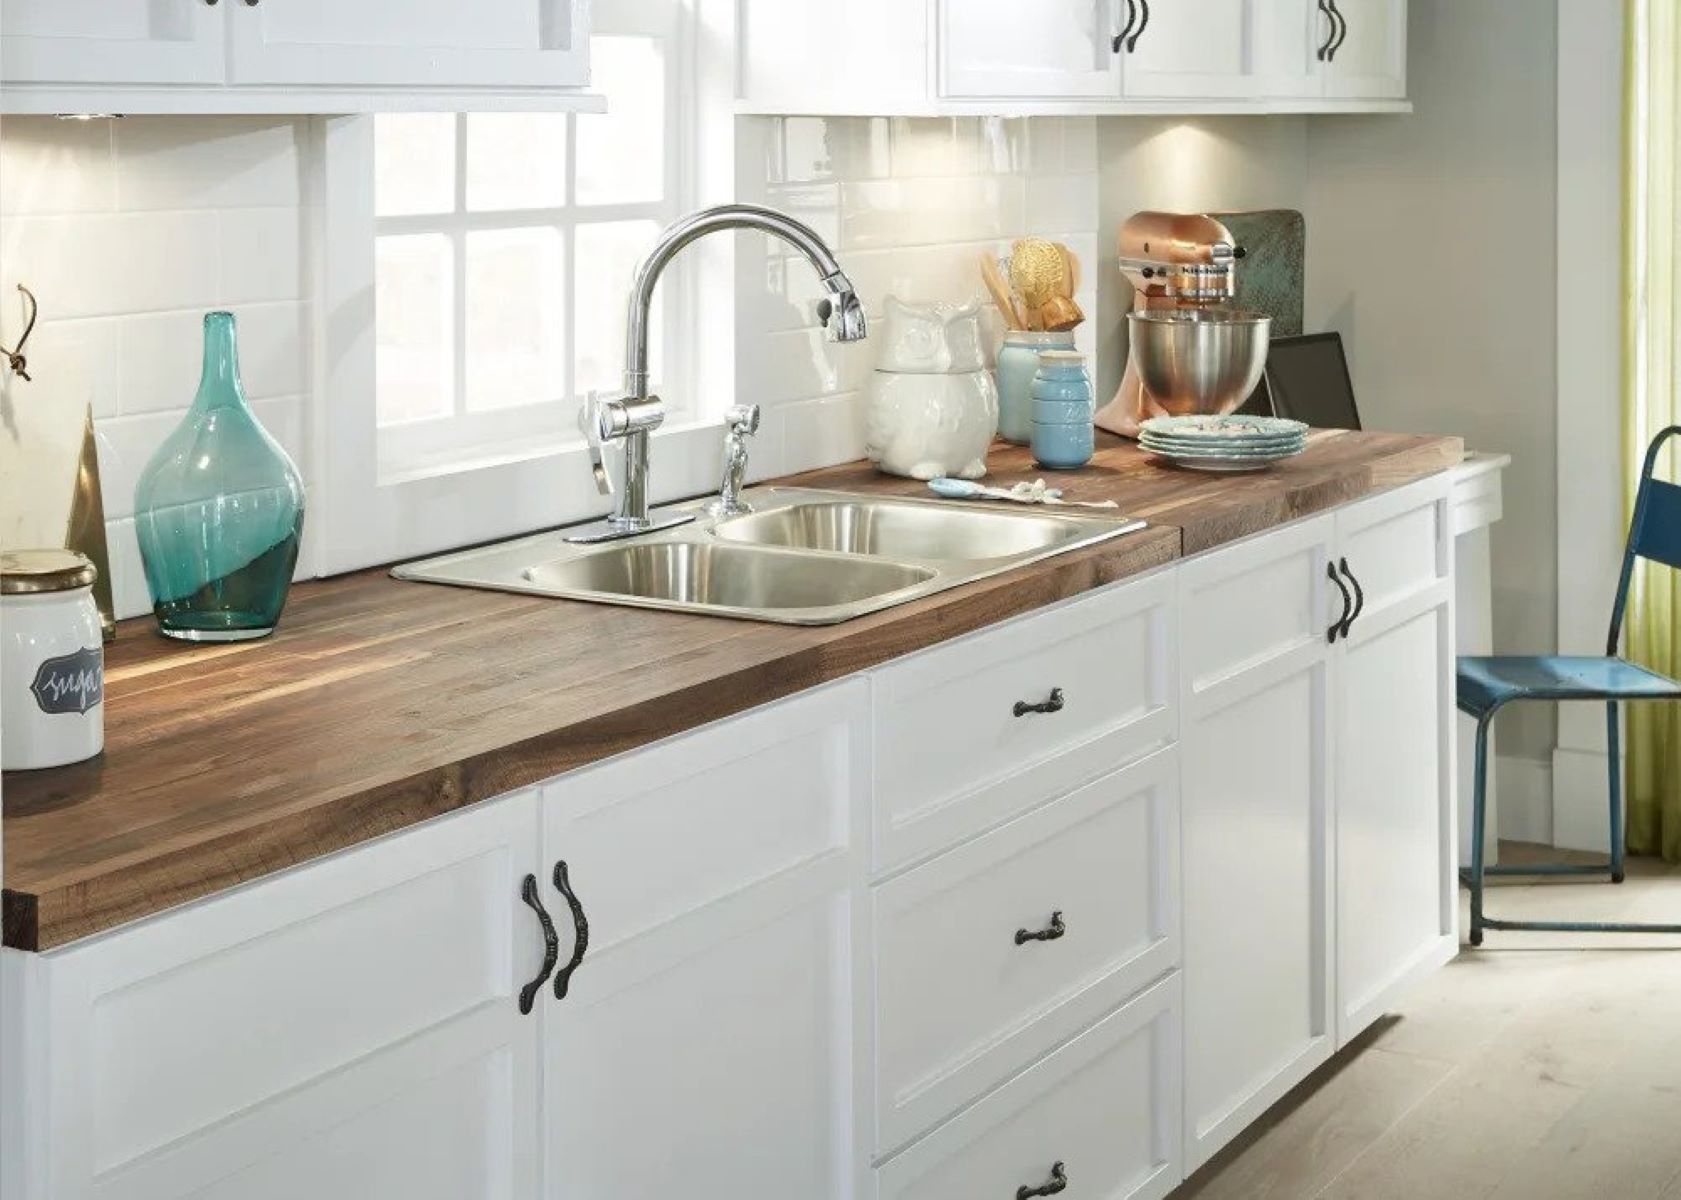 What Kind Of Backsplash Goes With Butcher Block Countertops 1696685734 